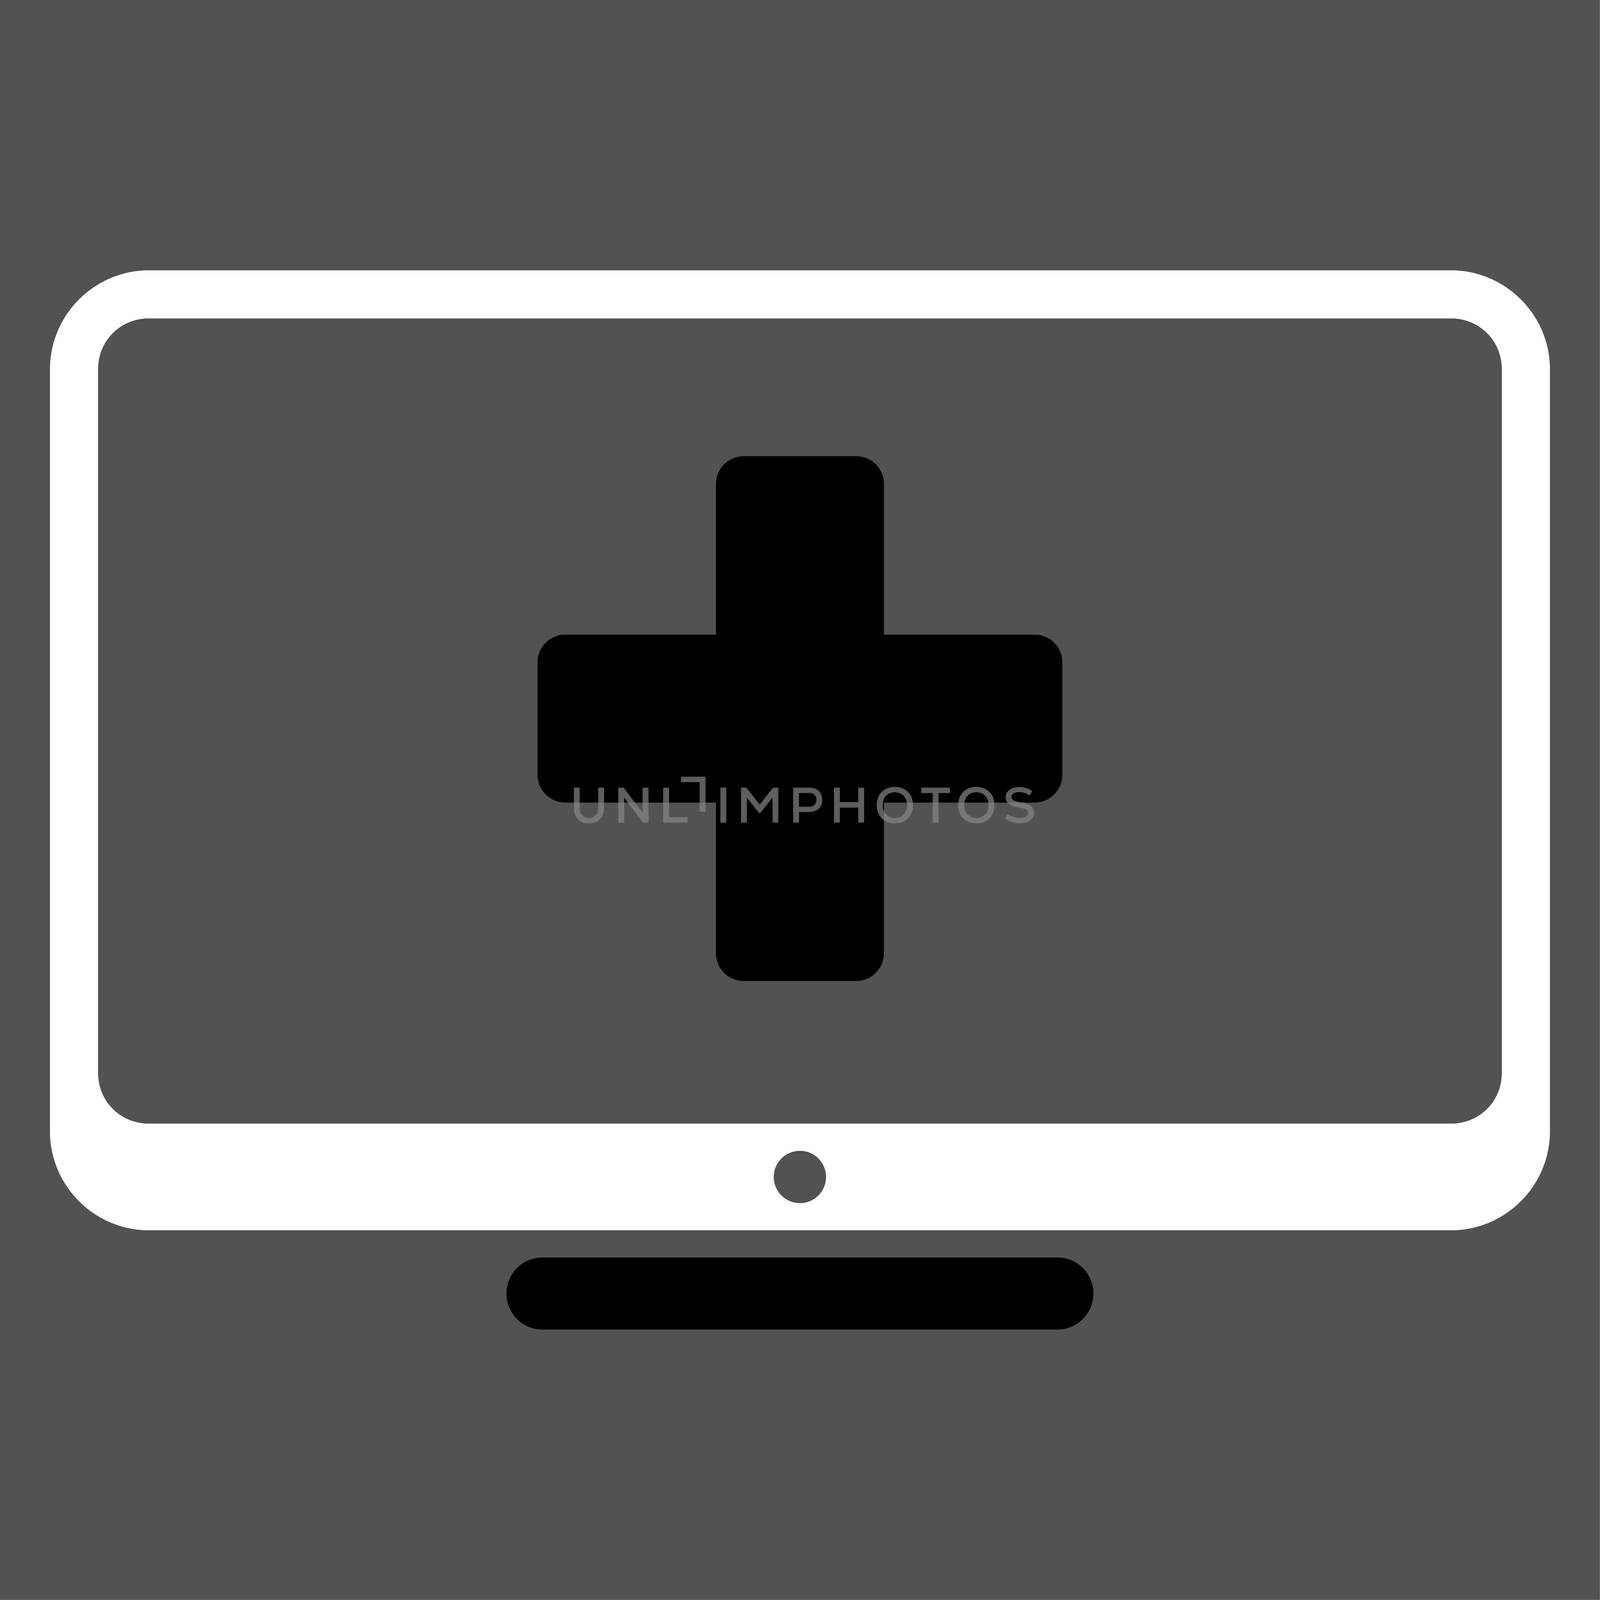 Medical Monitor raster icon. Style is bicolor flat symbol, black and white colors, rounded angles, gray background.